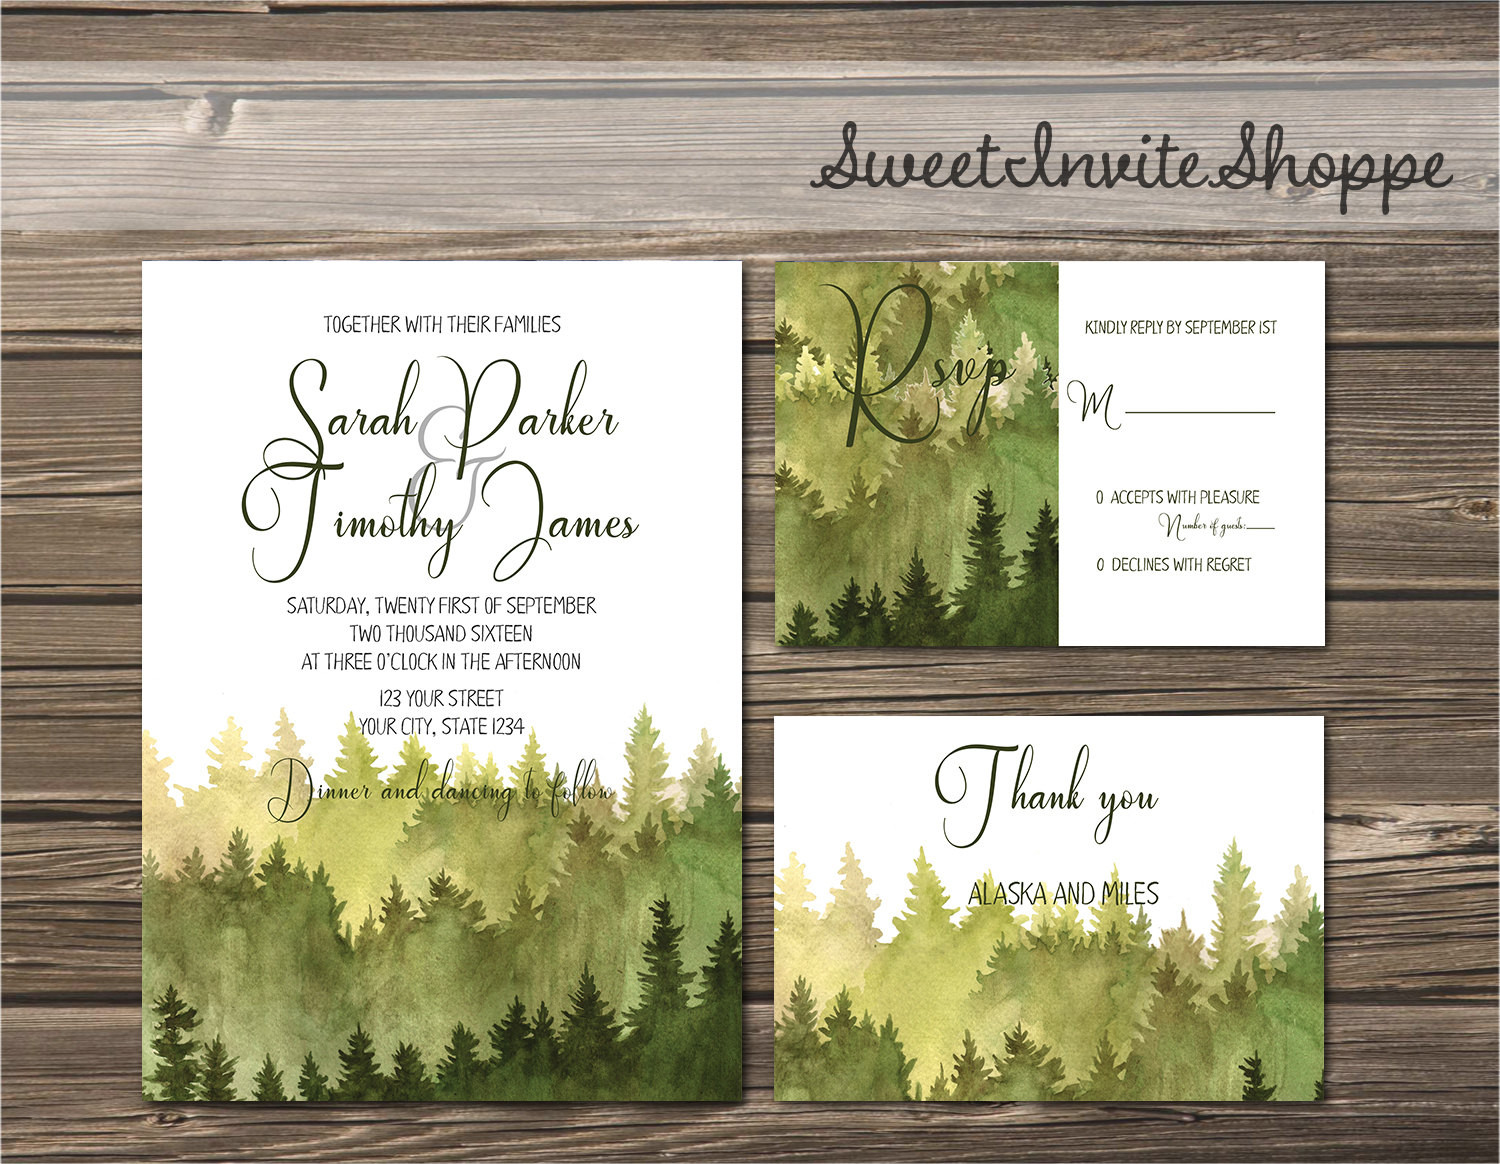 Wedding Invitations With Trees
 Watercolor Trees Wedding Invitation Rustic by